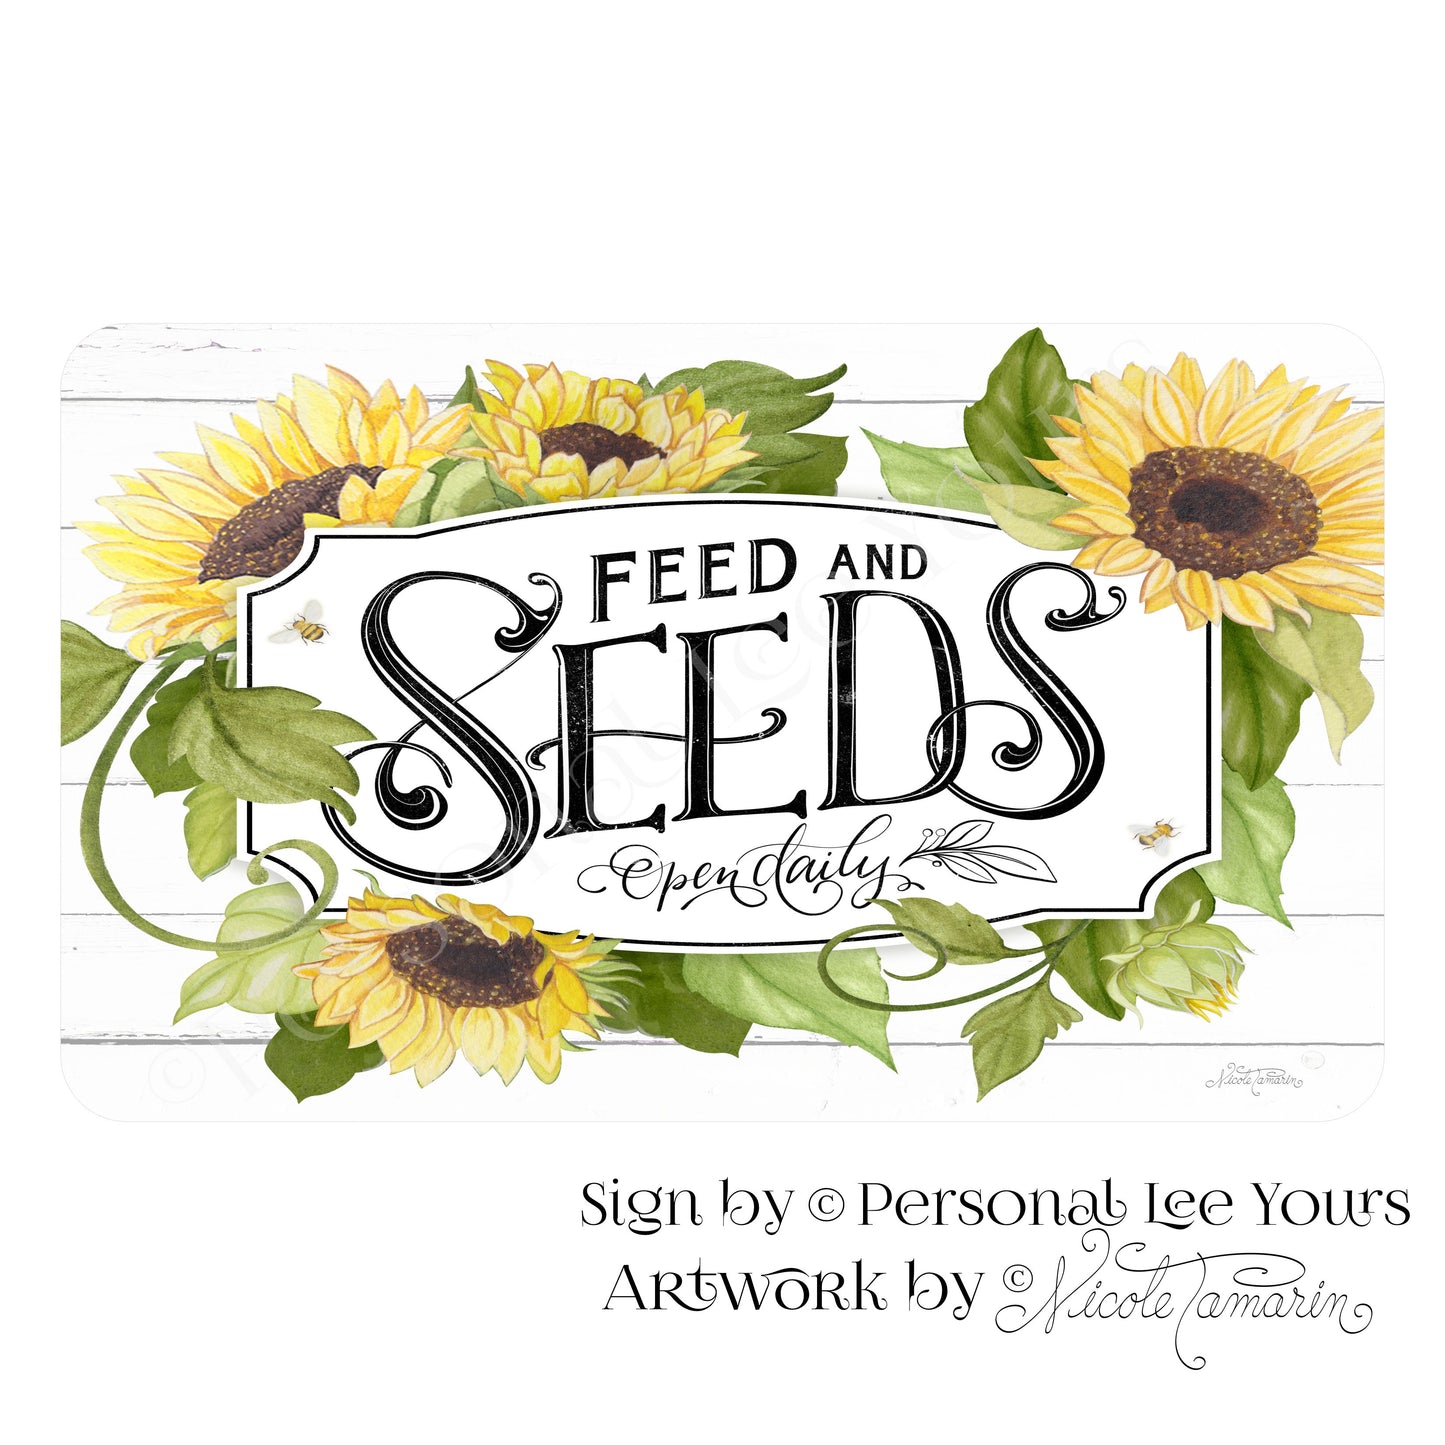 Nicole Tamarin Exclusive Sign * Sunflowers ~ Feed And Seeds * 4 Sizes * Lightweight Metal